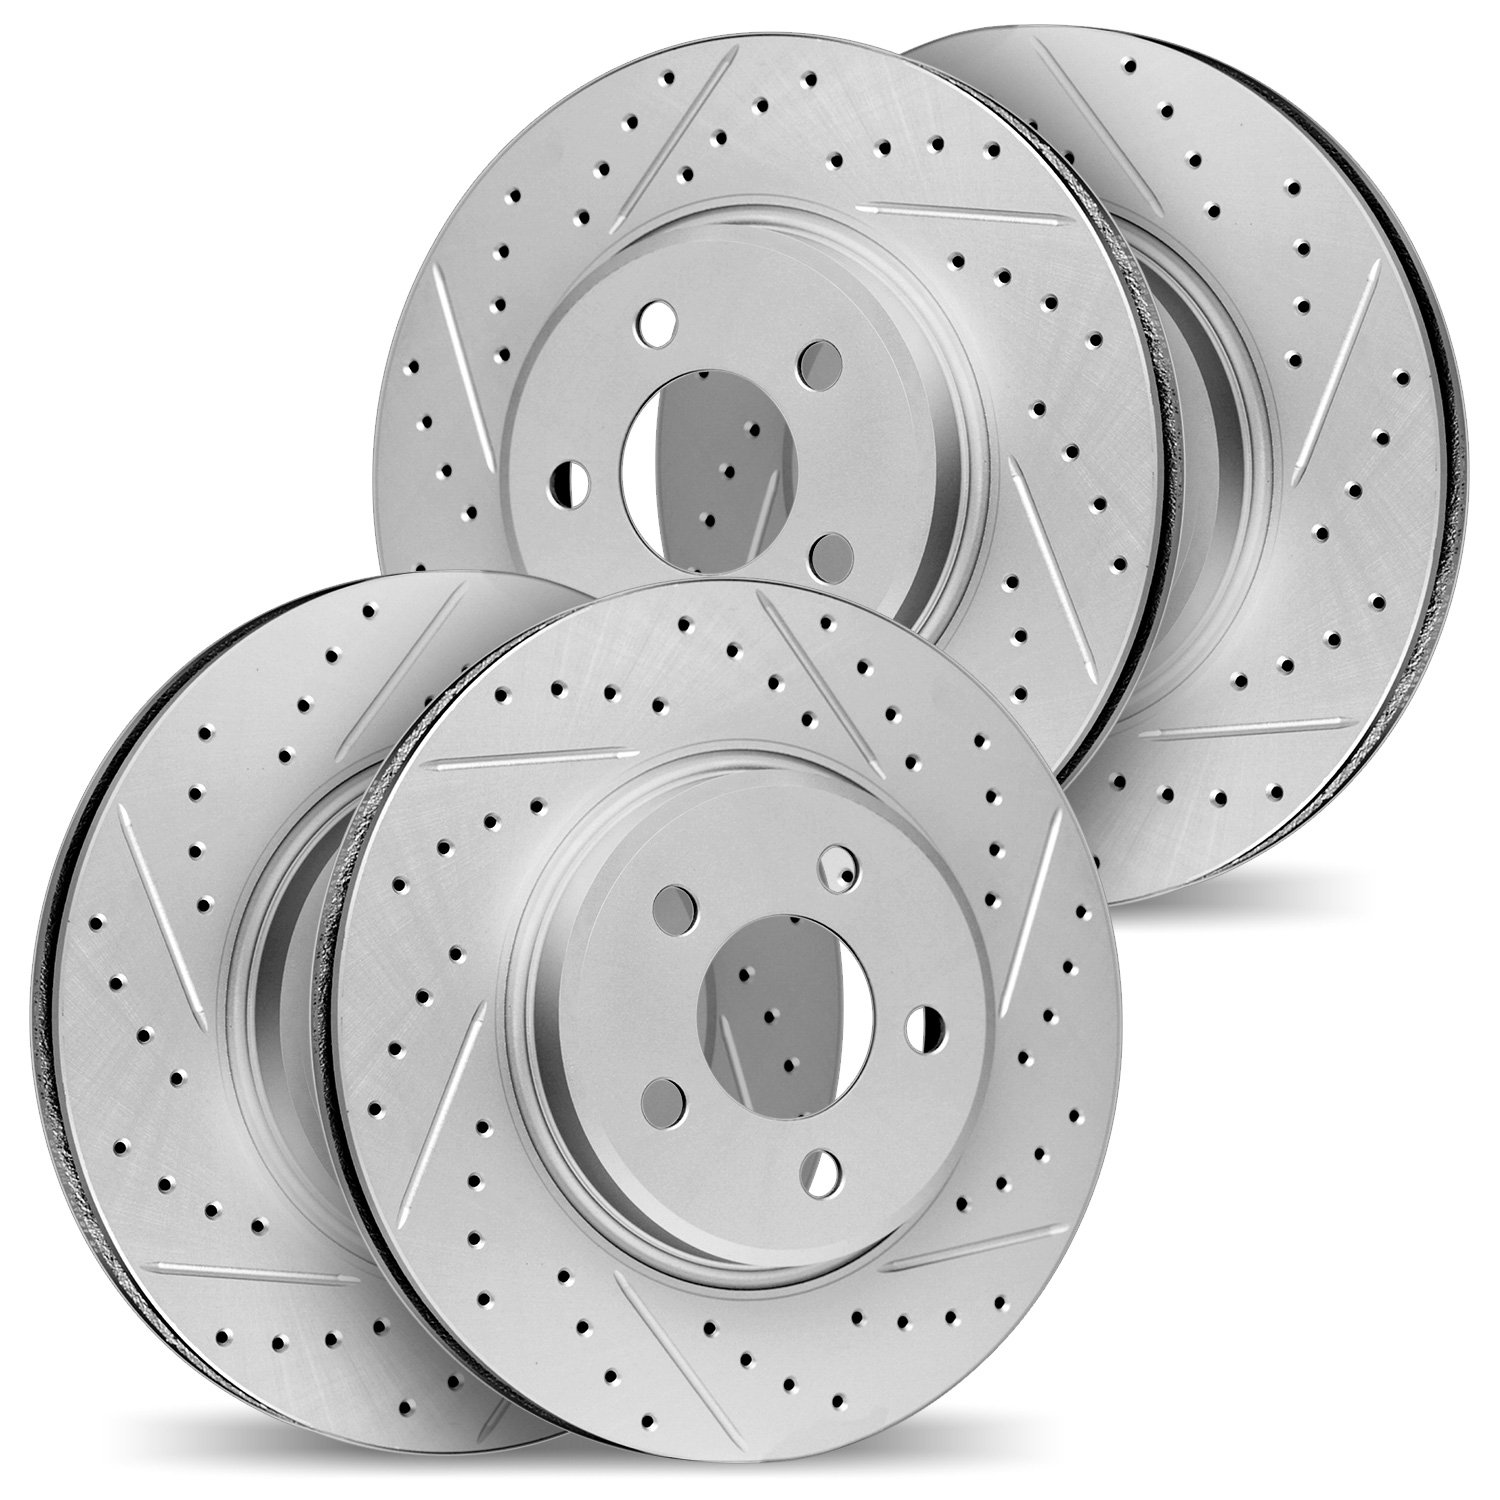 2004-11019 Geoperformance Drilled/Slotted Brake Rotors, 2013-2017 Land Rover, Position: Front and Rear